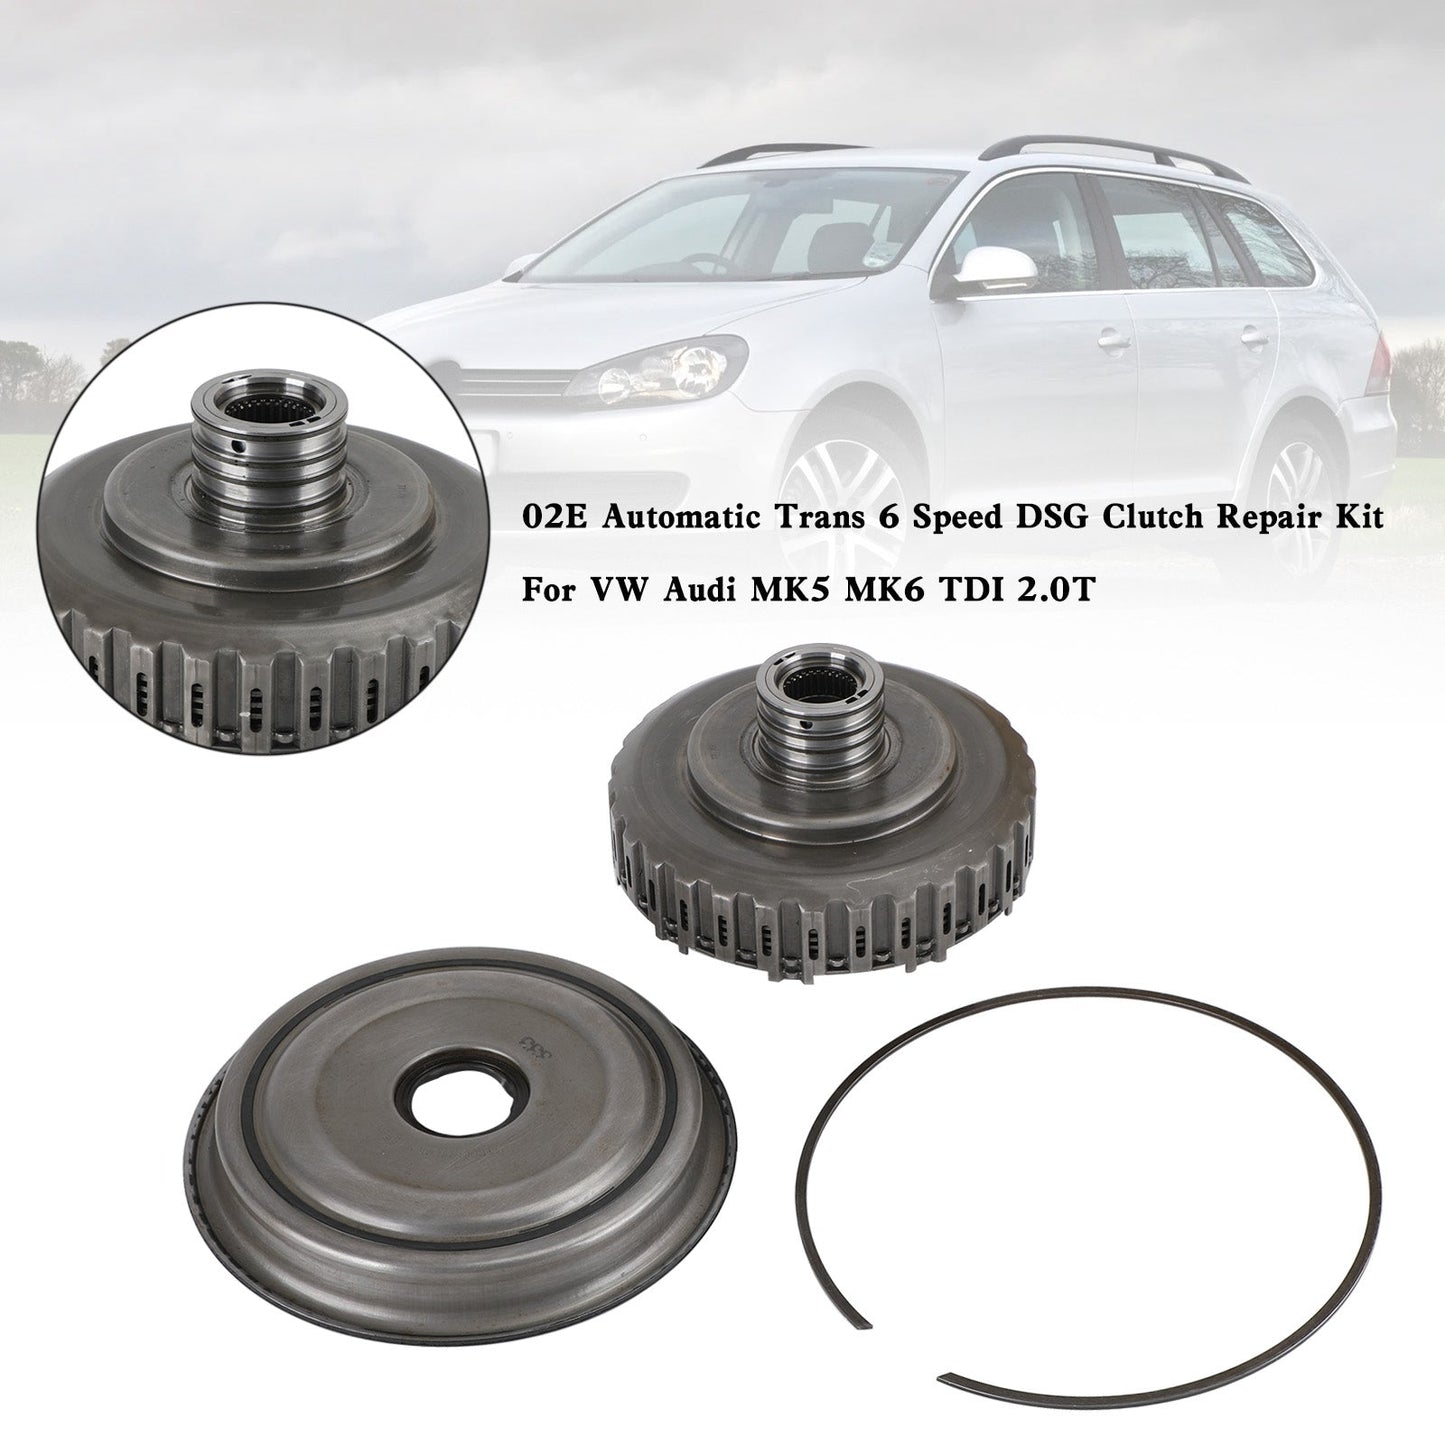 2004-2006 Volkswagen New Beetle Convertible 02E Automatic Trans 6 Speed DSG Clutch Repair Kit